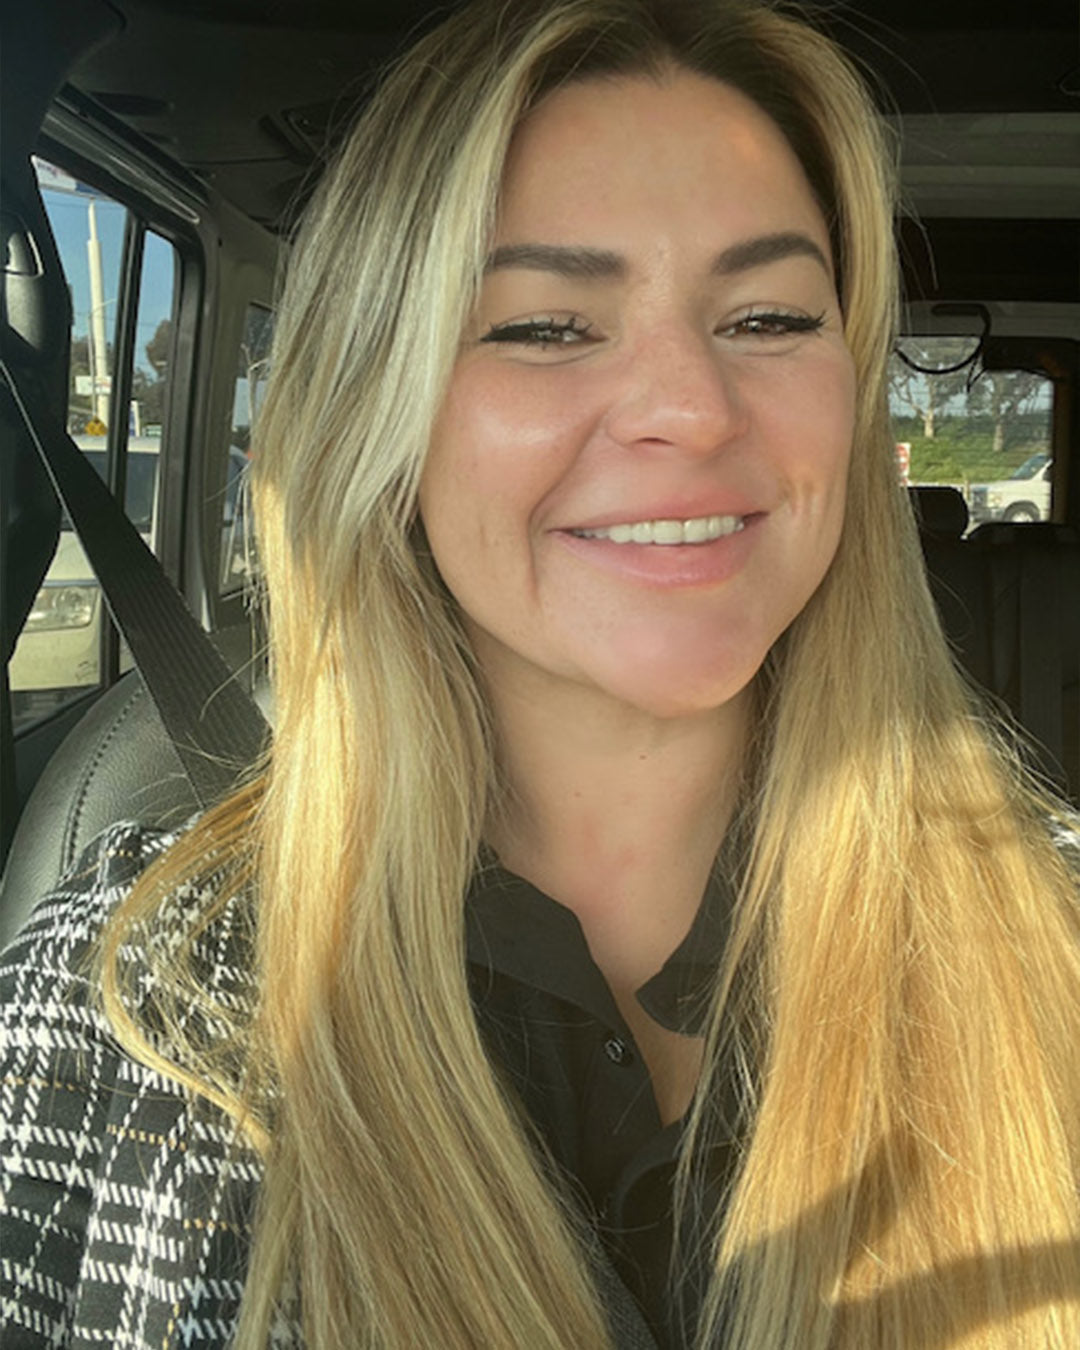 selfie of a blonde white woman smiling who is our client